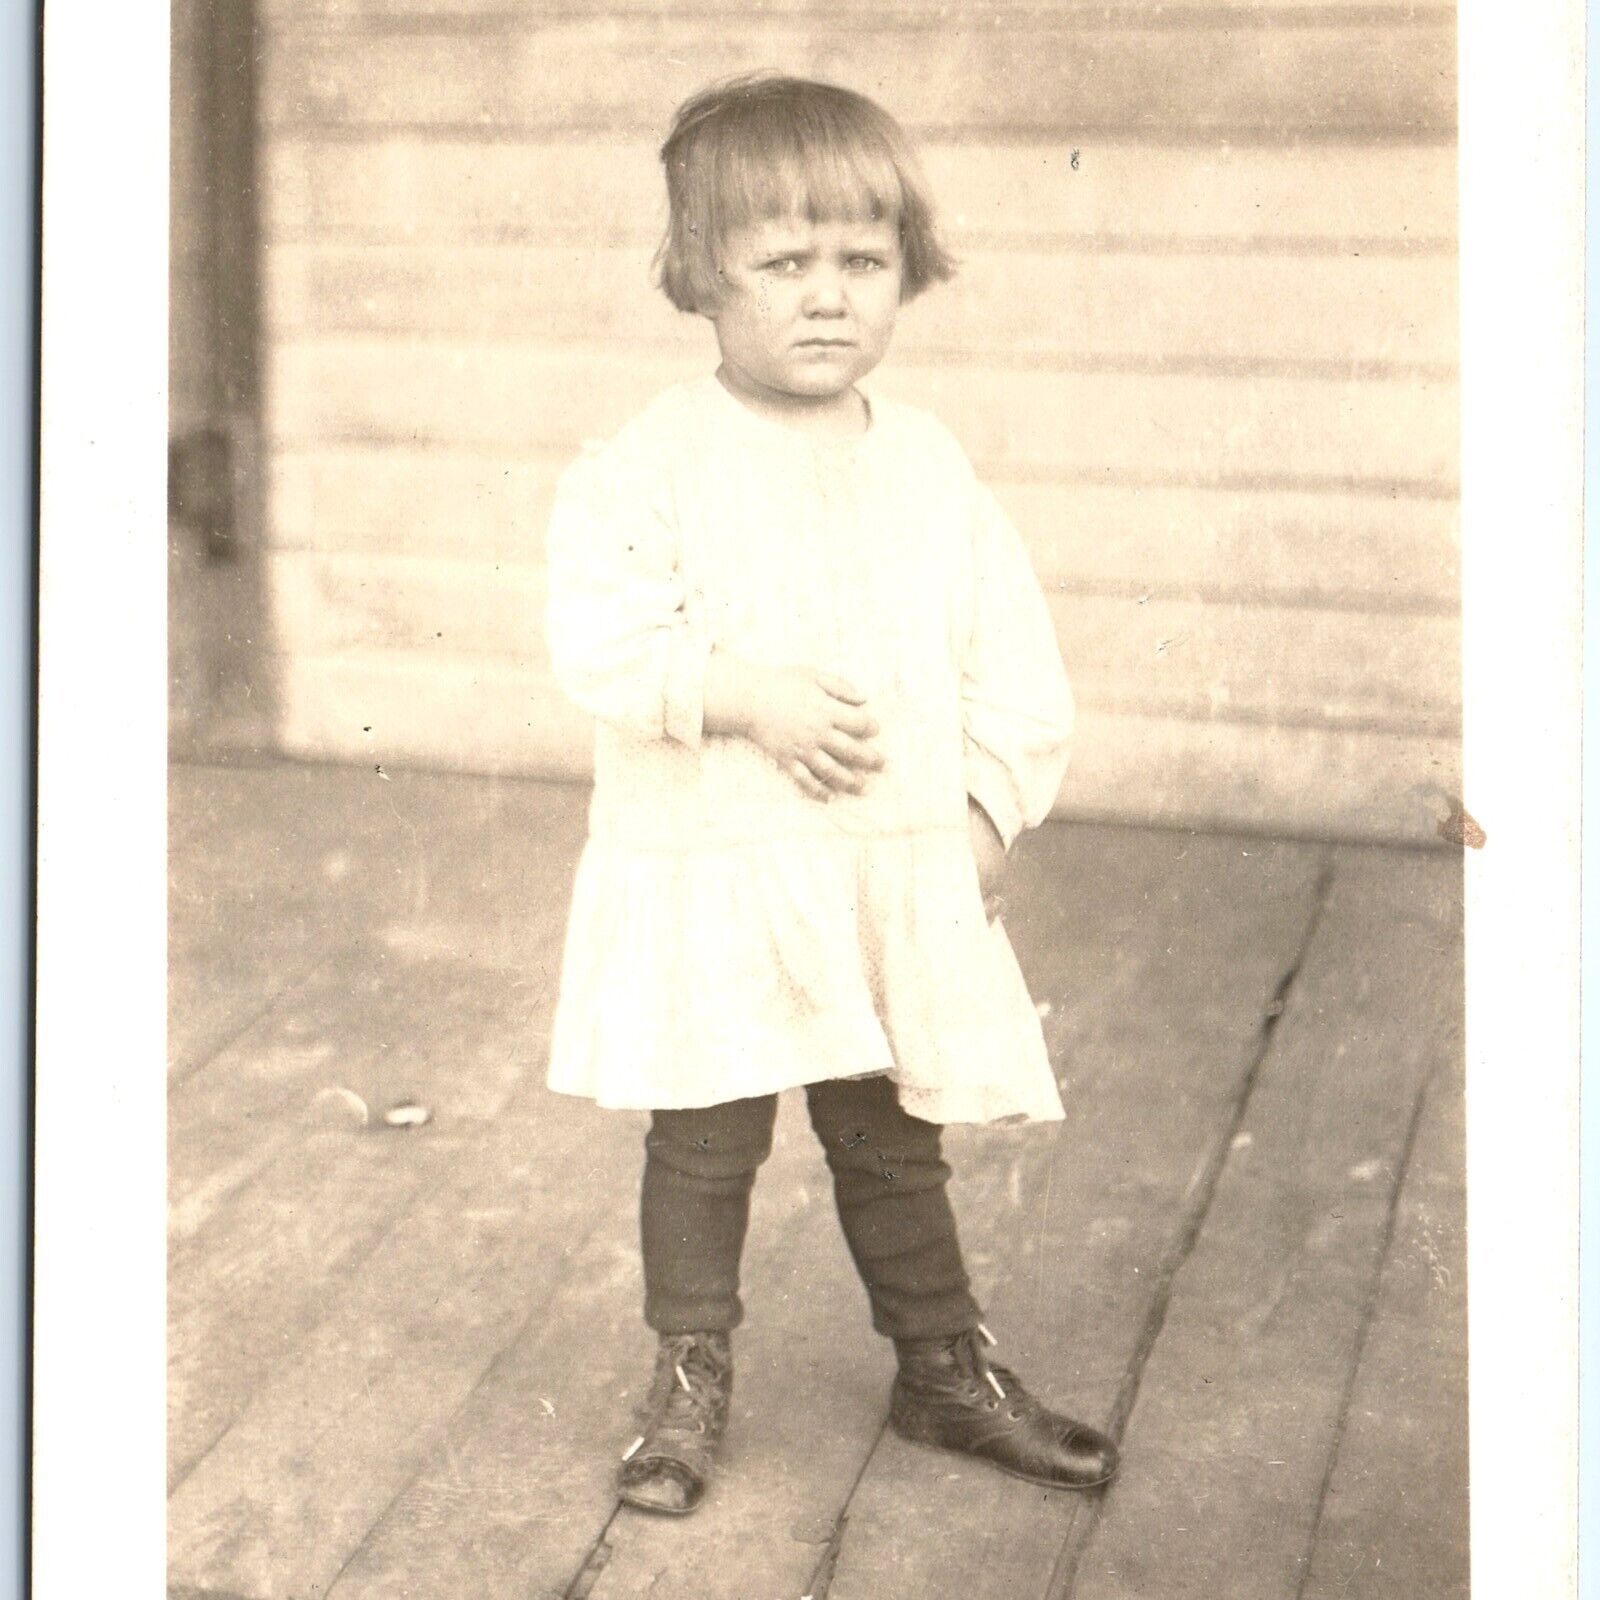 ID'd c1910s Cute Mad Little Girl RPPC Unhappy Child Kid Photo Mabel Hubler A156